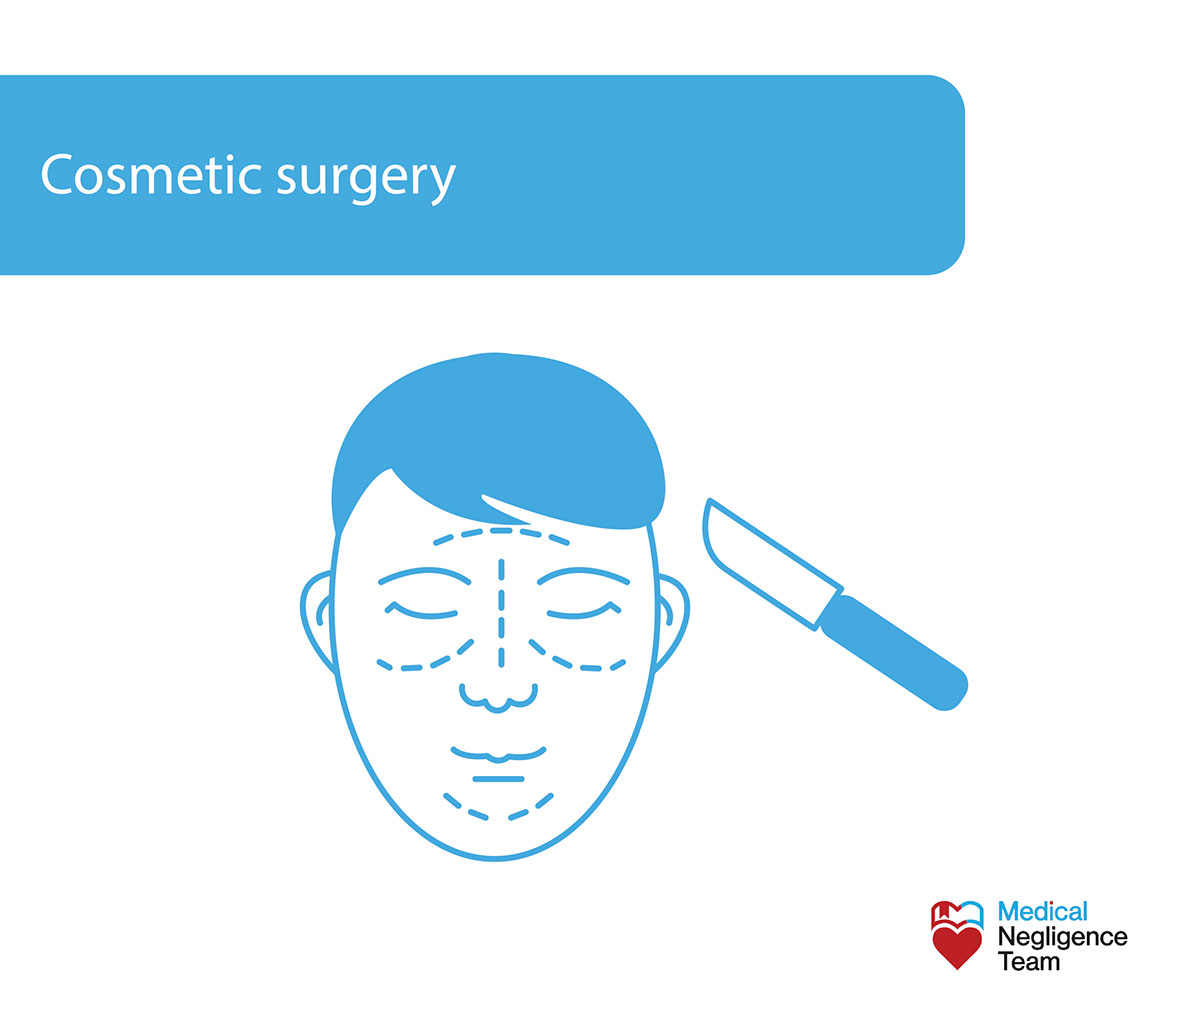 Cosmetic surgery negligence claims